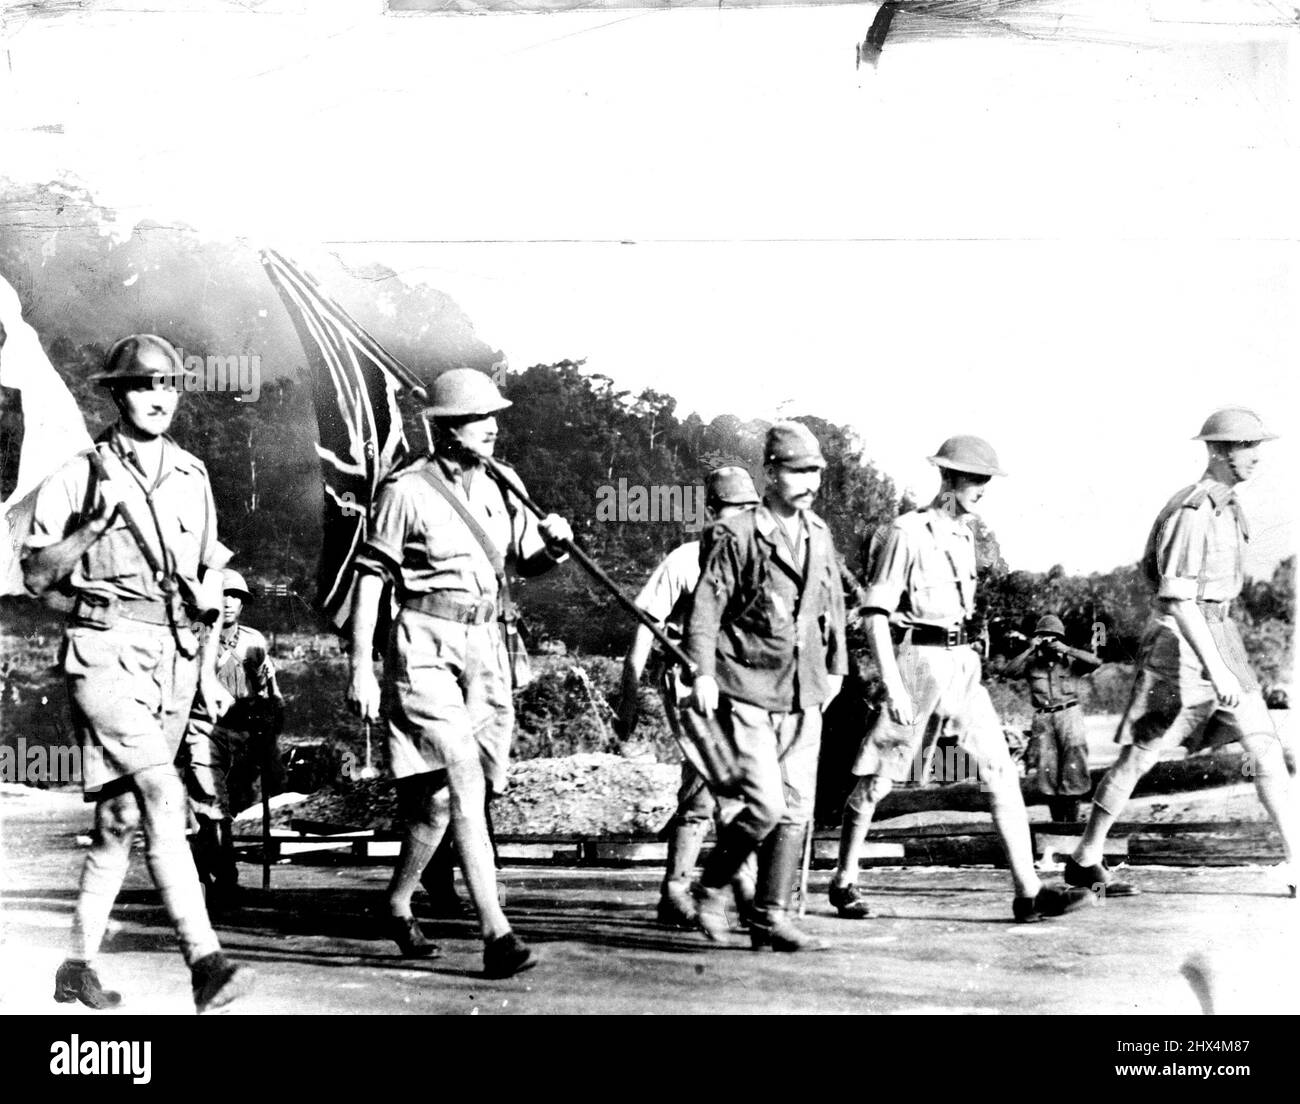 The British party led by General Percival (extreme right) accompanied by Japanese officers on air way to talk terms for the Surrender of Singapore. Singapore Surrender -- Japs Say The Japanese say this picture shows British Officers at Singapore on the way to meet Japanese Lieut. Gen. Tomoyuki to talk surrender terms. Man at extreme ***** is identified as British Commander, Lieut. Gen. A. E. Percival; man in centre as a Japanese officer, This picture reached the United States by way of Brazil. August 26, 1942. (Photo by Associated Press Photo). Stock Photo